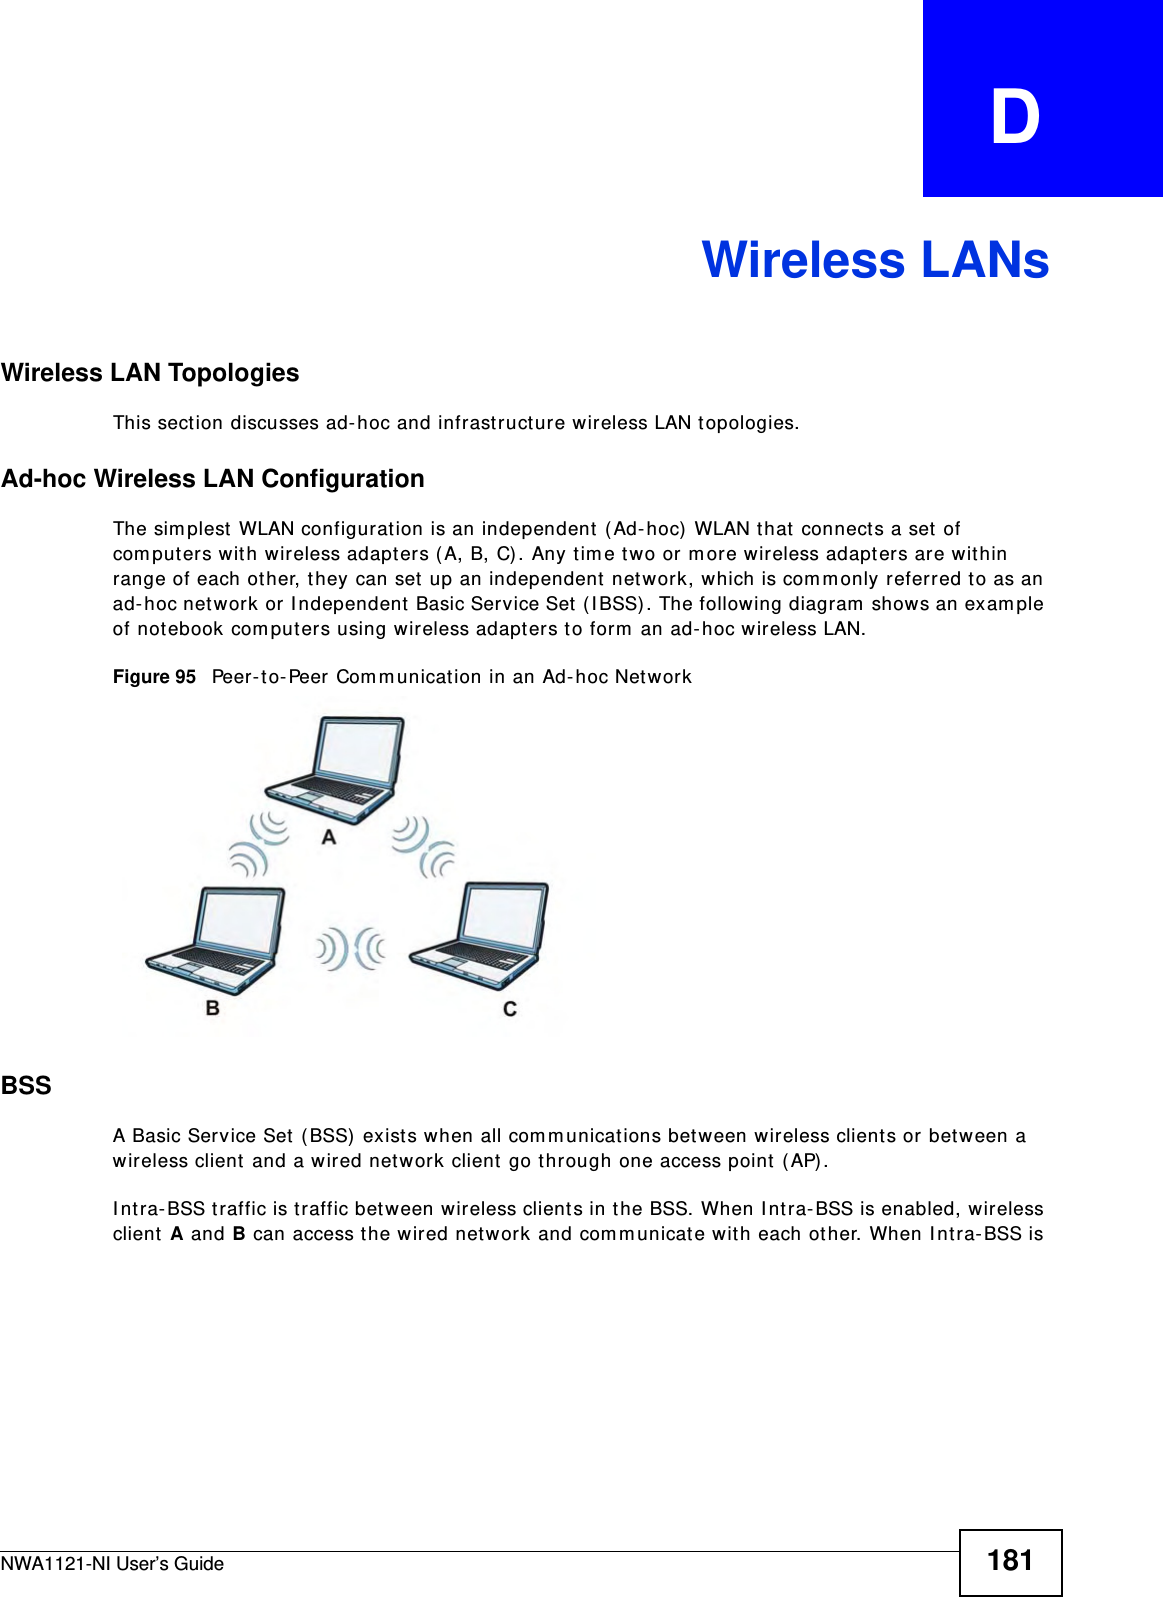 NWA1121-NI User’s Guide 181APPENDIX   DWireless LANsWireless LAN TopologiesThis section discusses ad-hoc and infrastructure wireless LAN topologies.Ad-hoc Wireless LAN ConfigurationThe simplest WLAN configuration is an independent (Ad-hoc) WLAN that connects a set of computers with wireless adapters (A, B, C). Any time two or more wireless adapters are within range of each other, they can set up an independent network, which is commonly referred to as an ad-hoc network or Independent Basic Service Set (IBSS). The following diagram shows an example of notebook computers using wireless adapters to form an ad-hoc wireless LAN. Figure 95   Peer-to-Peer Communication in an Ad-hoc NetworkBSSA Basic Service Set (BSS) exists when all communications between wireless clients or between a wireless client and a wired network client go through one access point (AP). Intra-BSS traffic is traffic between wireless clients in the BSS. When Intra-BSS is enabled, wireless client A and B can access the wired network and communicate with each other. When Intra-BSS is 